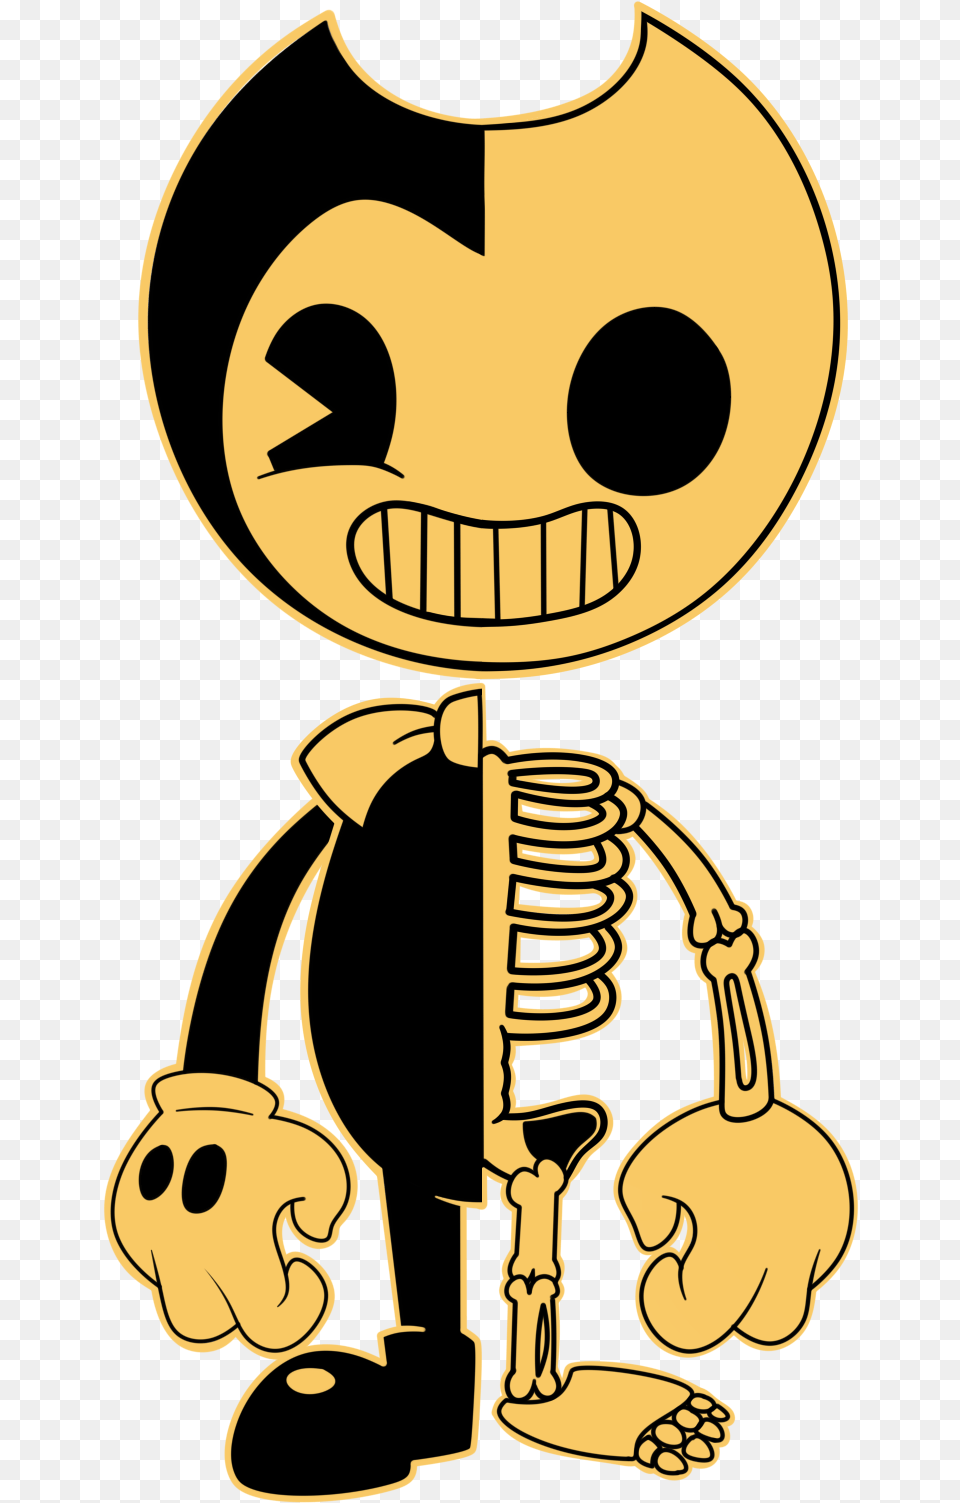 Skeletor Bendy Bendy And The Ink Machine Png Image